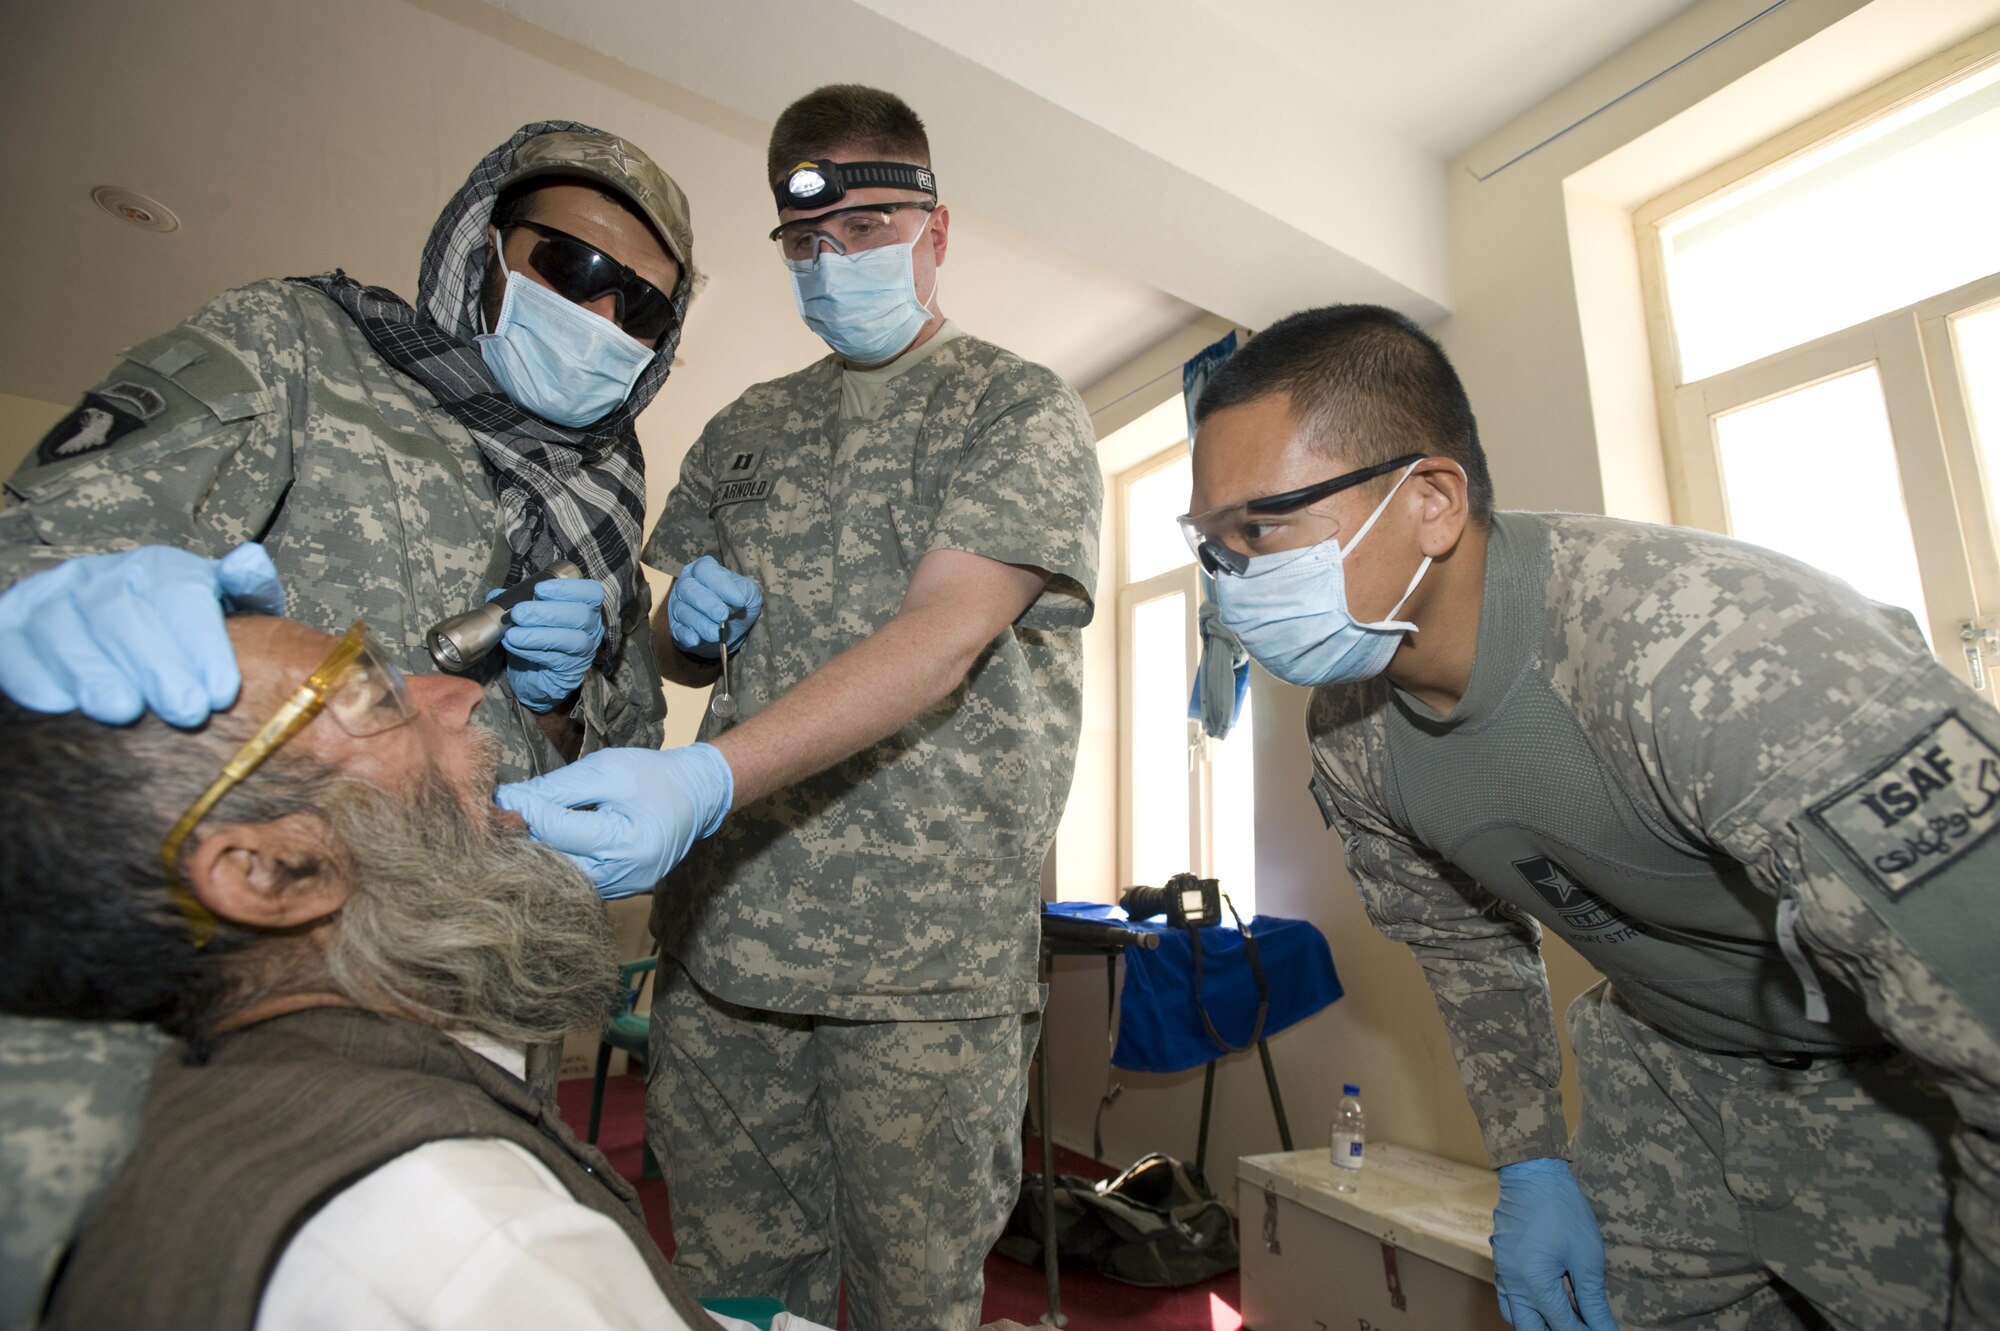 SHAJOY, Afghanistan -- (Left to right) Afghan interpreter John, Capt. (Dr.) James Arnold and Staff Sgt. Nestor Abalos, examine an Afghan man's teeth at a Village Dental Outreach hosted by the Zabul Provincial Reconstruction Team. Although most Afghans lack basic dental hygiene products, their teeth remain relatively healthy due to limited sugar in their diets. When they do have problems many go untreated for years with the lack of basic dental care. The Zabul PRT uses the visits to address these problems, which normally consist of extracting the bad tooth. (U.S. Air Force photo/Master Sgt. Keith Brown)